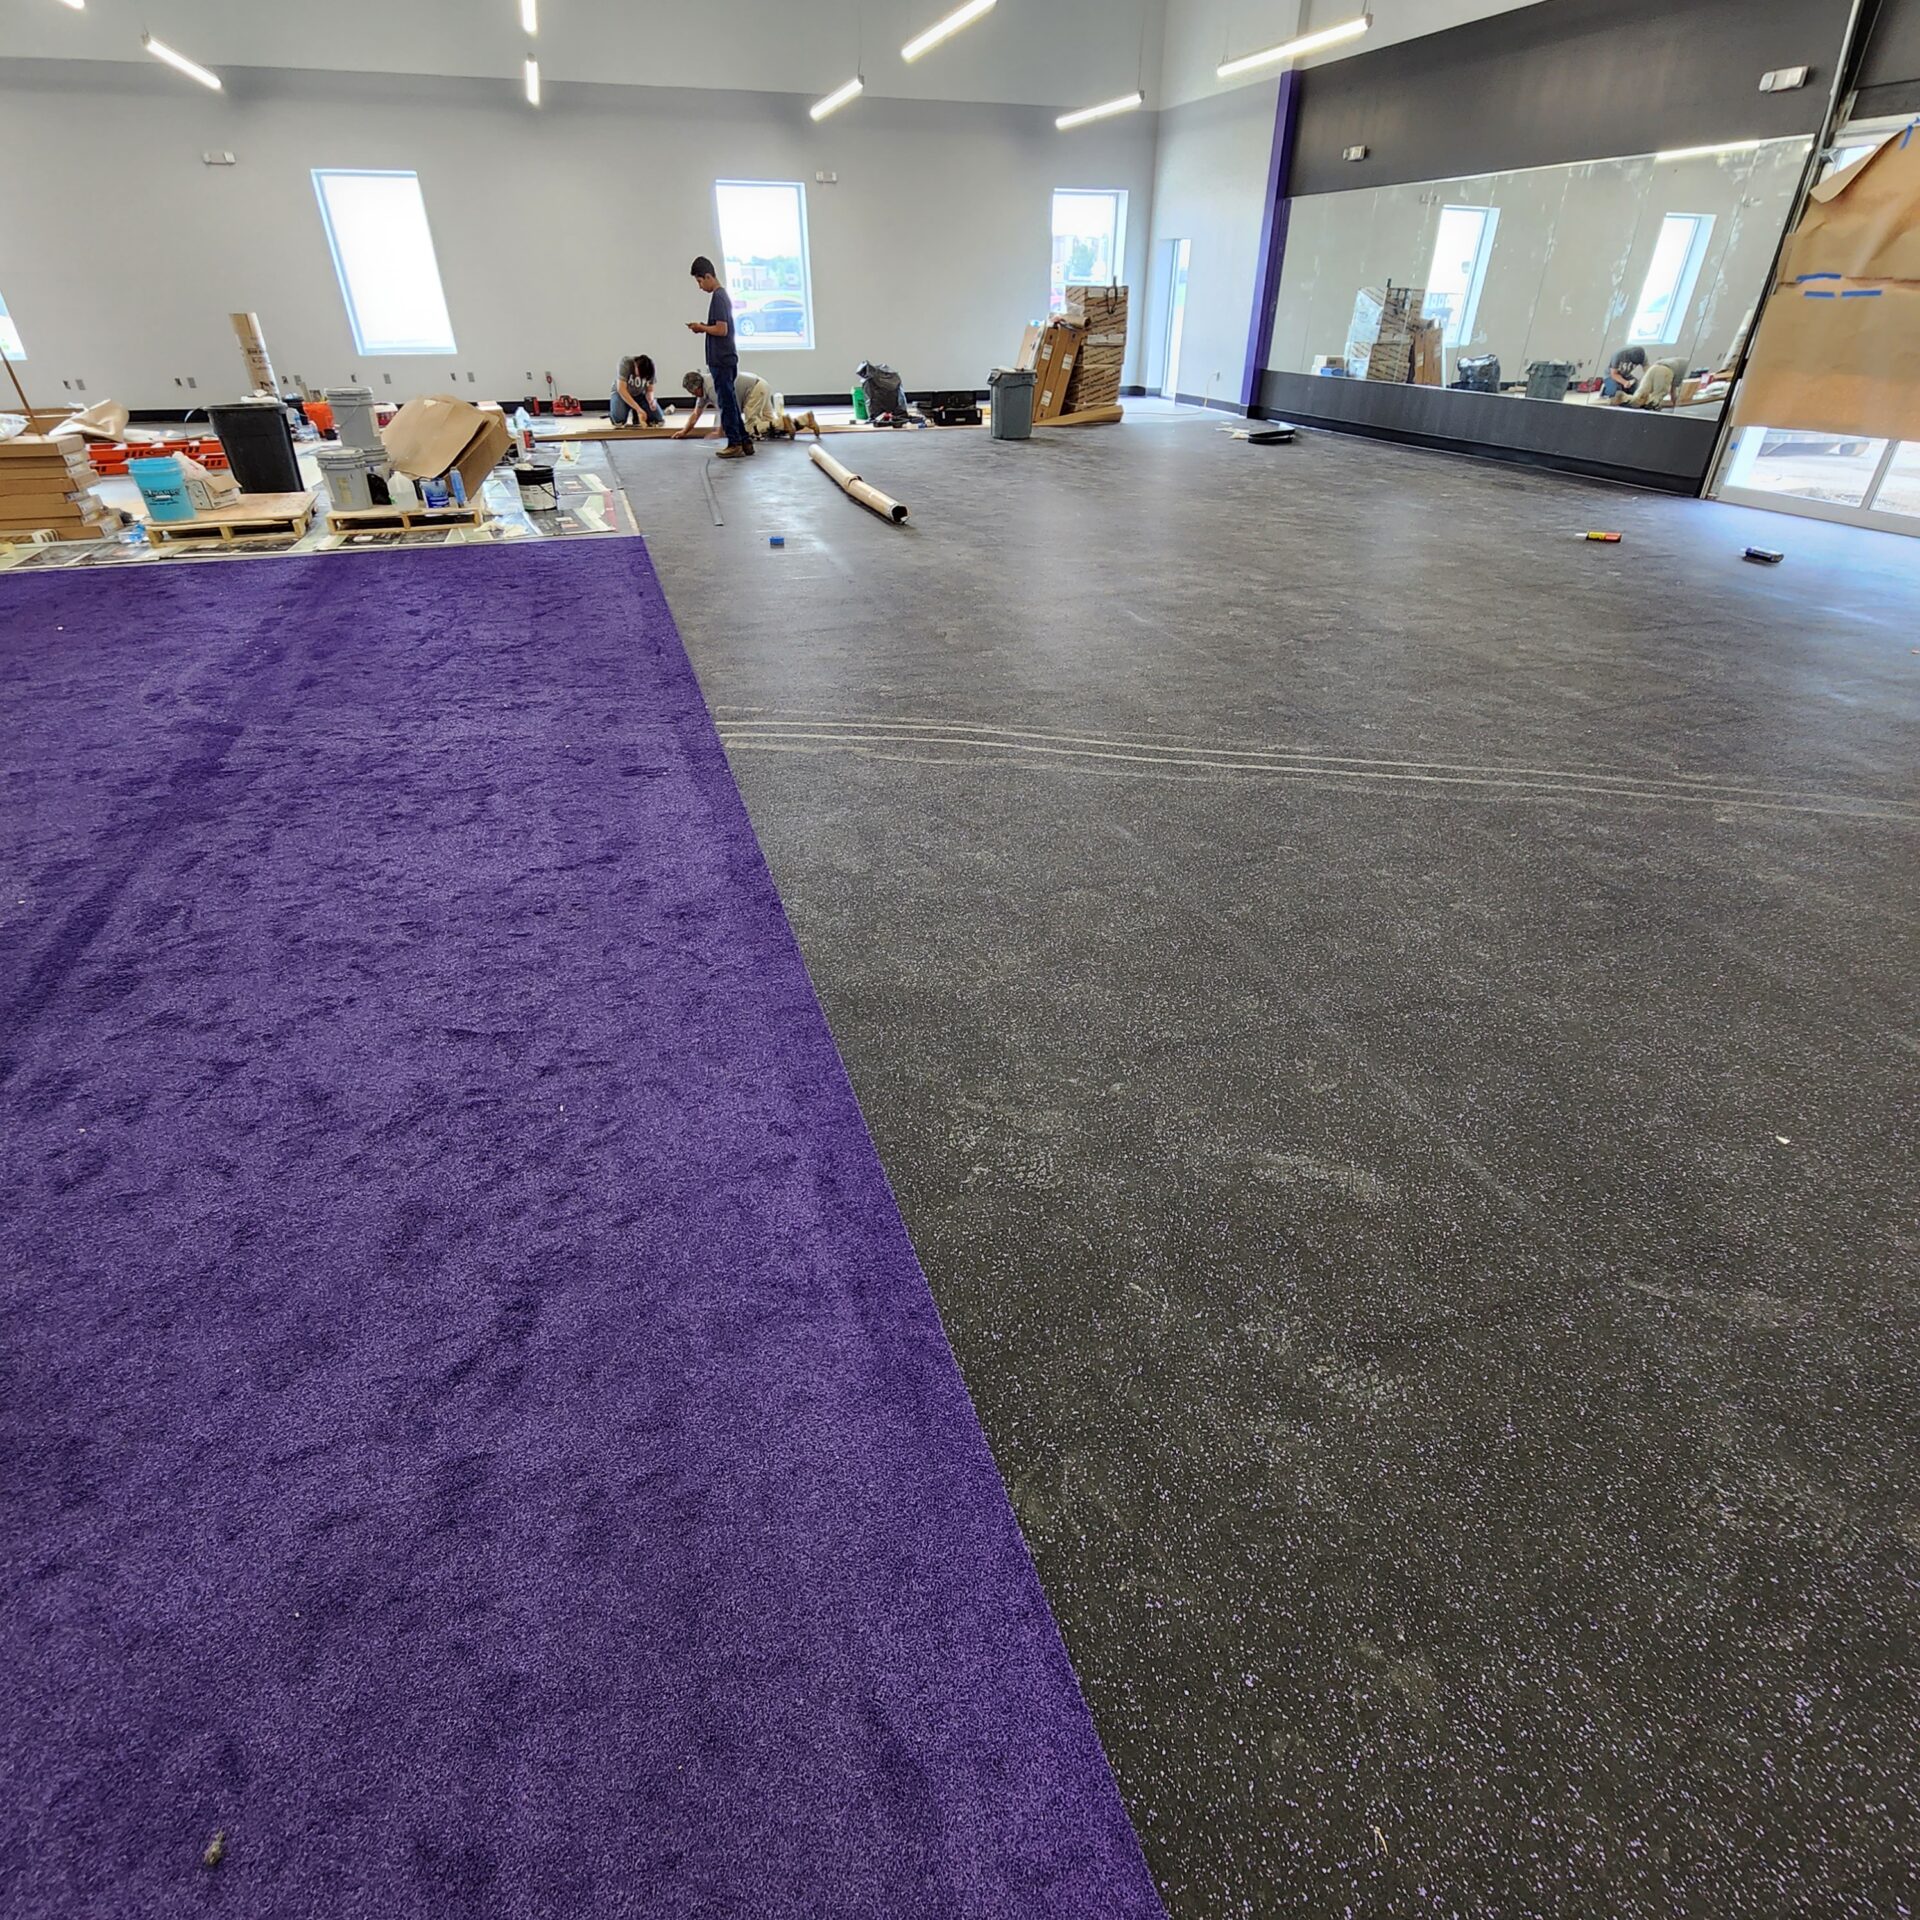 Ecore rolled rubber and rage turf installed at Anytime Fitness Gym in Jamestown, ND Buffalo Mall